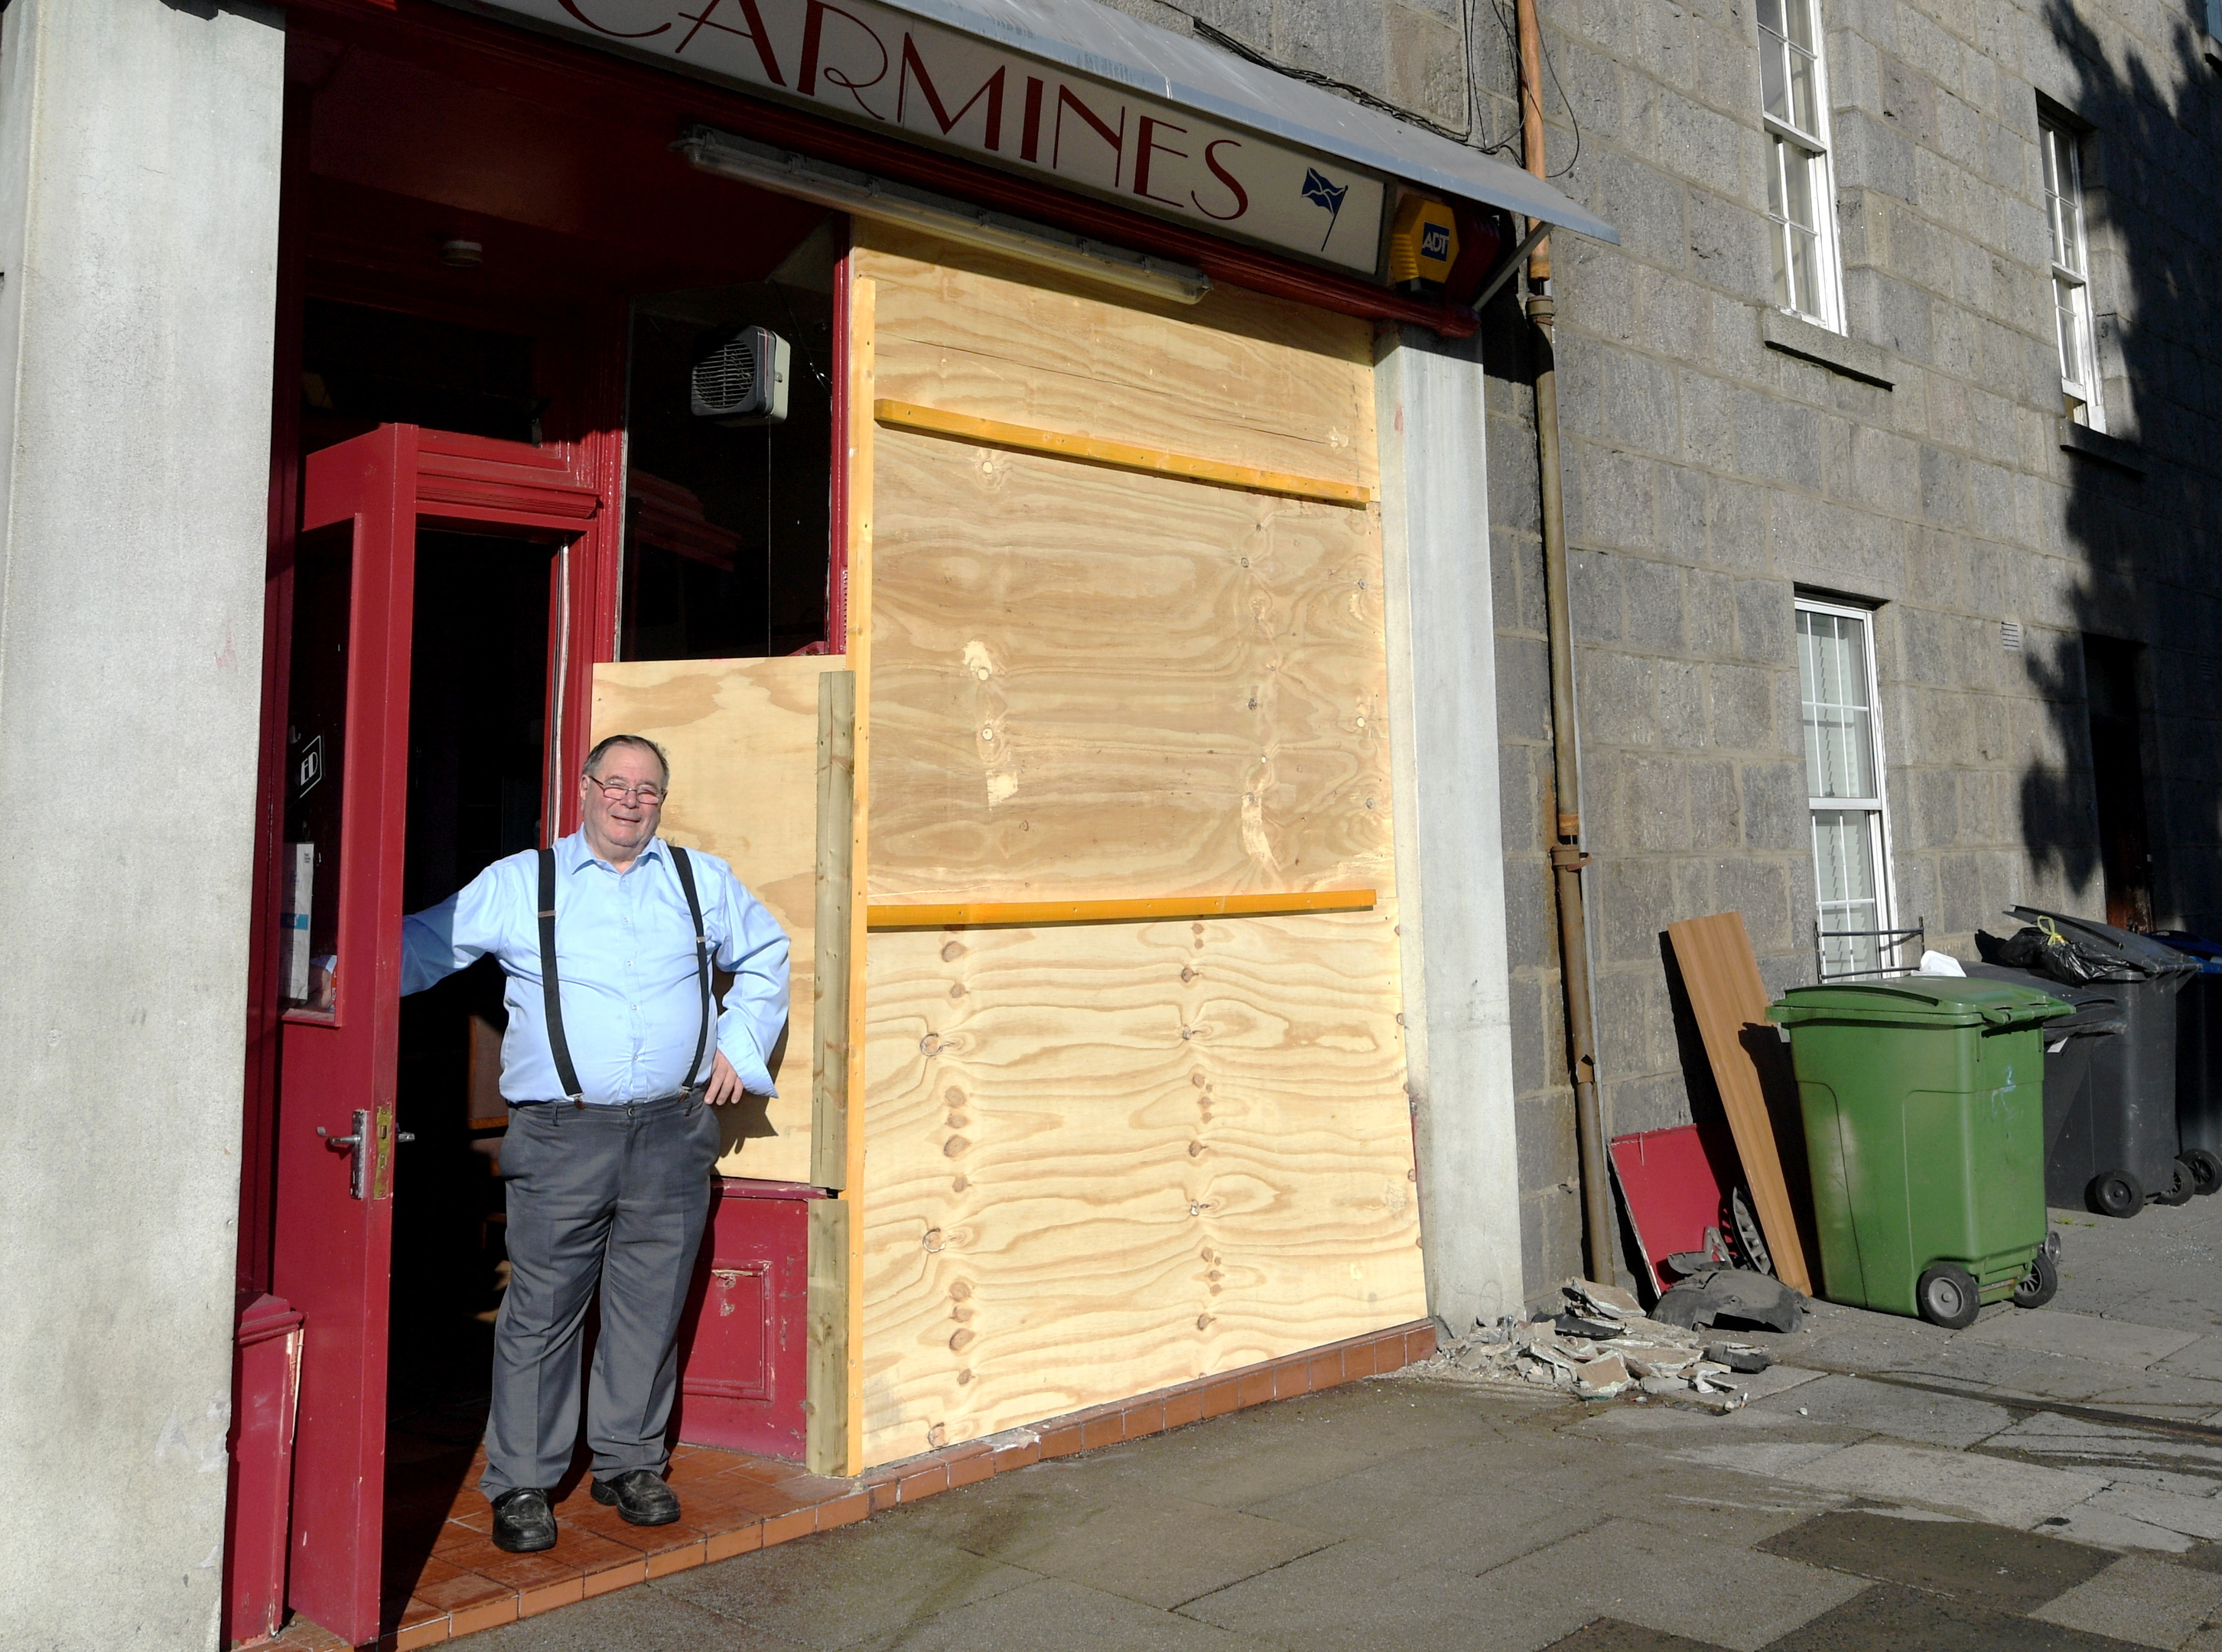 Carmine's restaurant on Union Terrace was damaged when a van crashed into the front of the building in the early hours of the morning. Owner Scarpellino Carmine looks surveys the damage.
25/07/18.
Picture by KATH FLANNERY